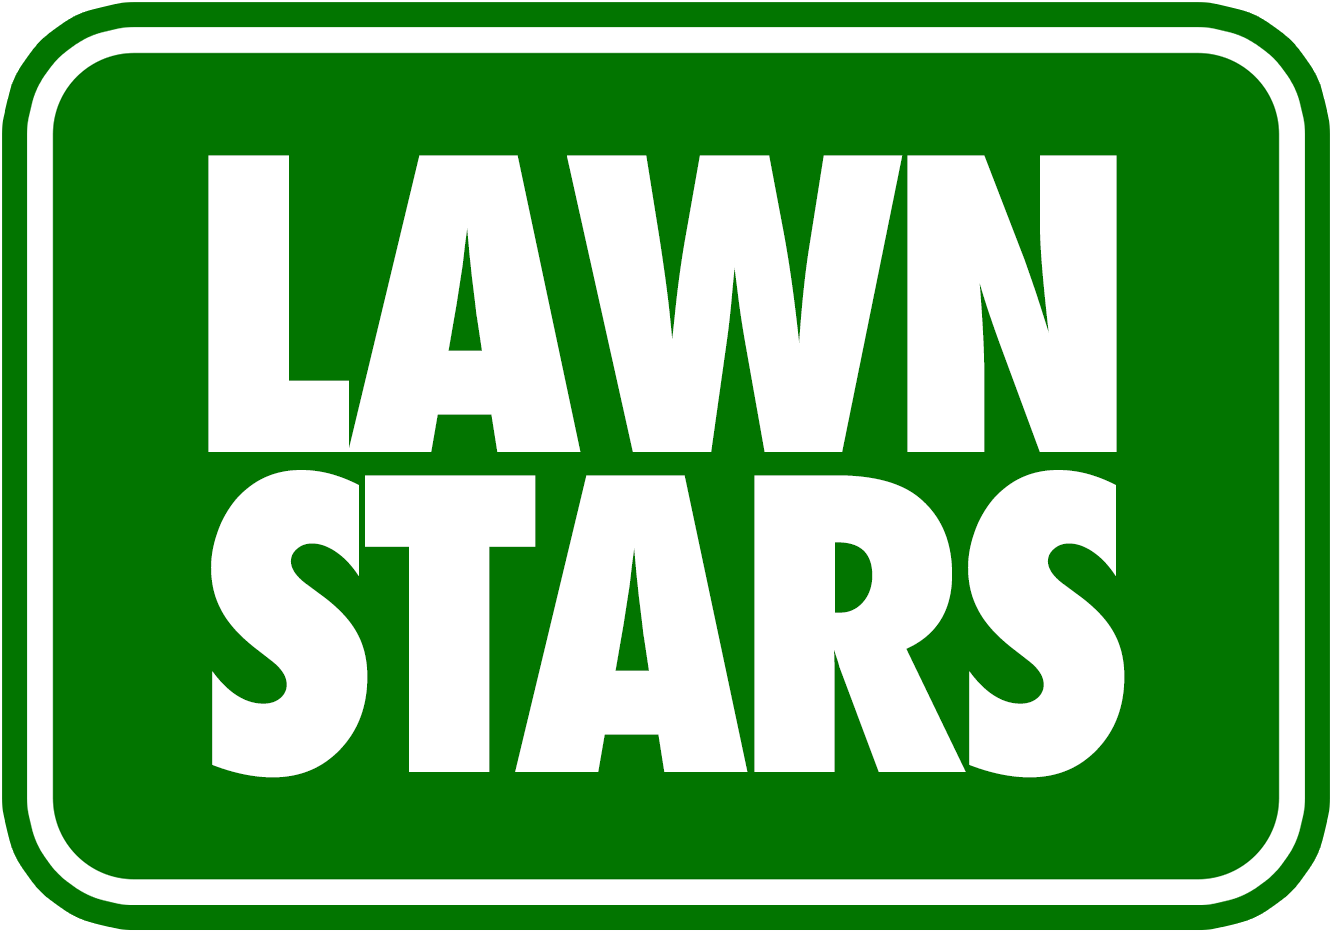 Rowville Lawn Mowing - Lawn Stars